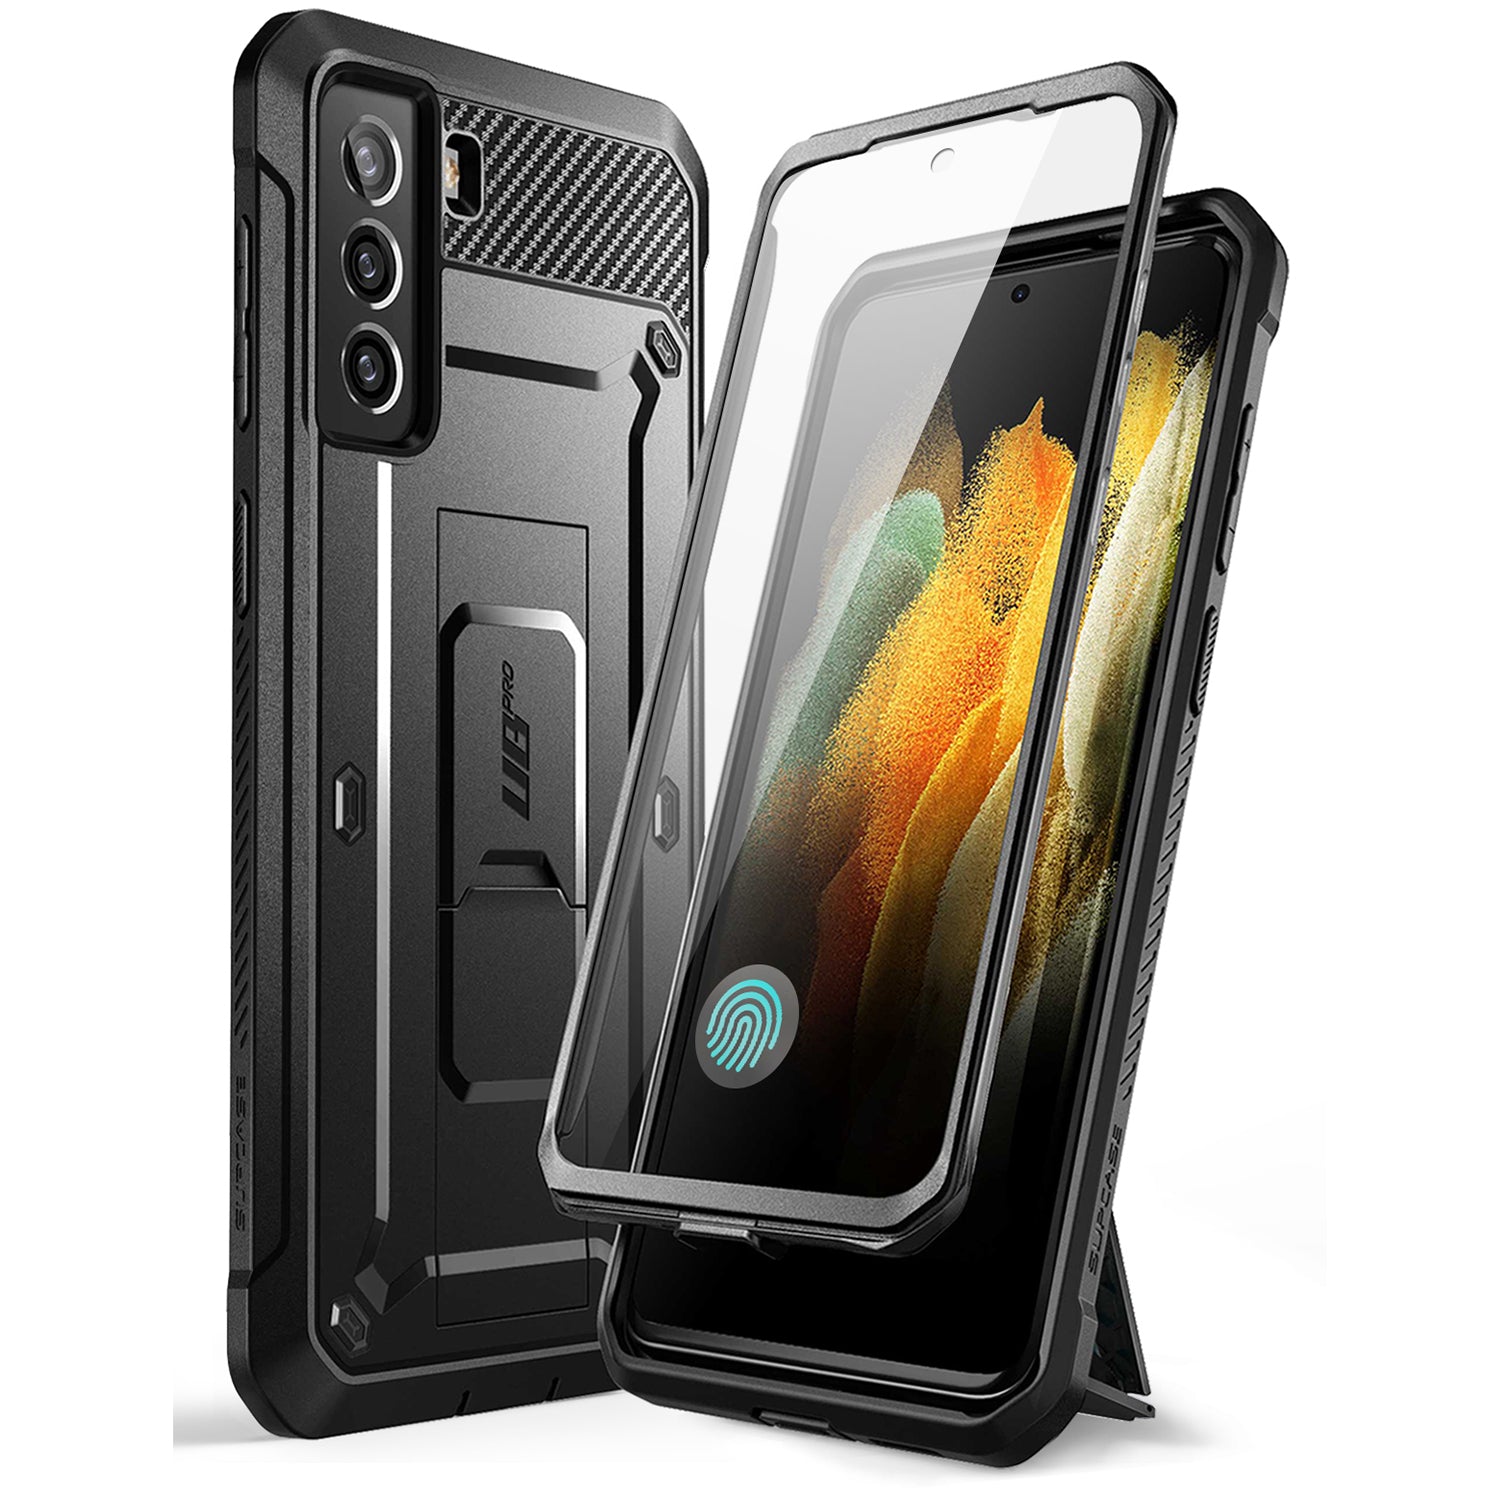 Supcase Unicorn Beetle Pro Series Full-Body Rugged Holster Case for Samsung Galaxy S21 FE(With built-in Screen Protector) Default Supcase Black 